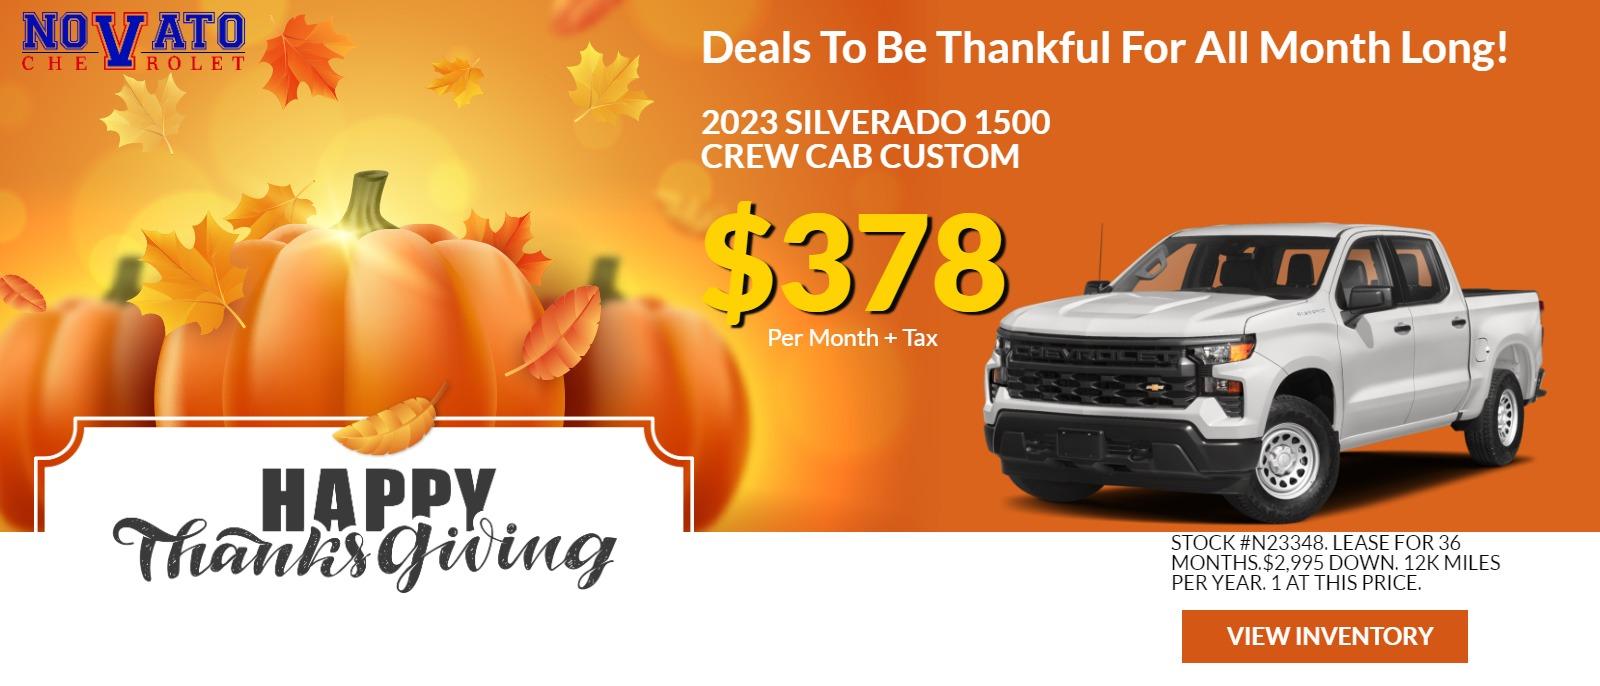 STOCK #  N23348   SILVERADO 1500       2995 DOWN 378 PER MONTH 36 MONTH 12K   1 AT THIS PRICE